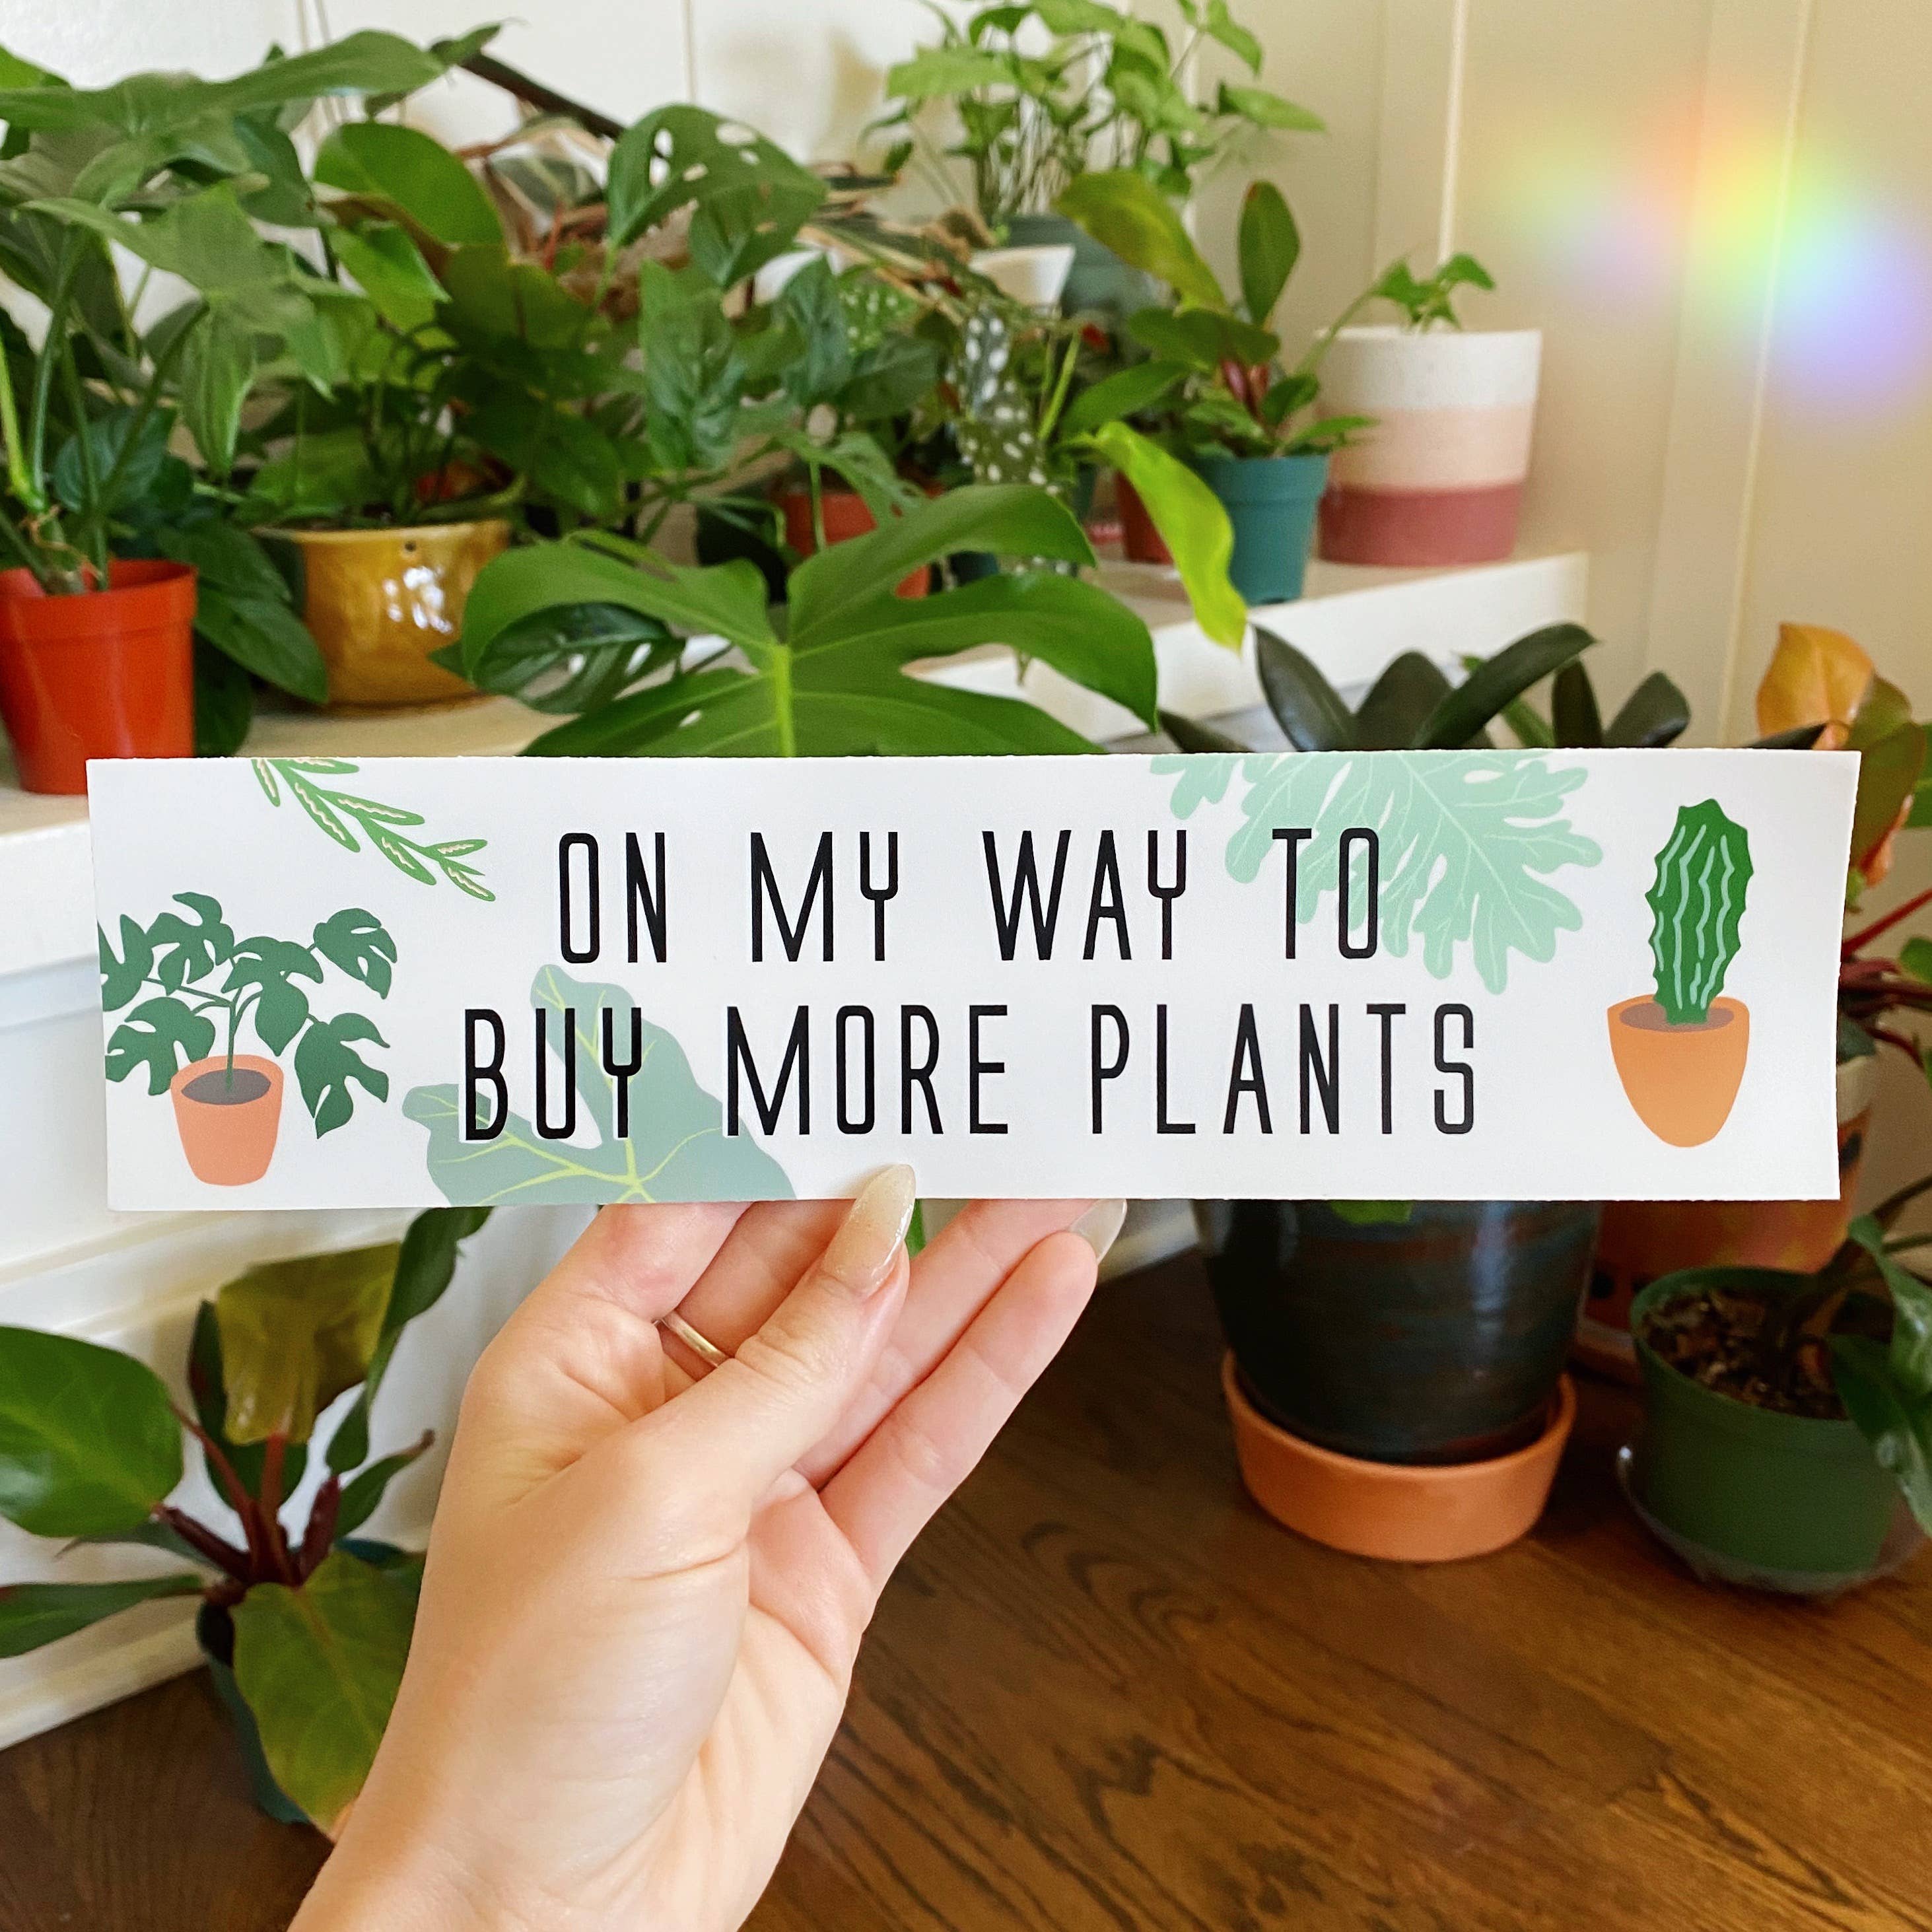 Bumper Sticker "ON MY WAY TO BUY MORE PLANTS"